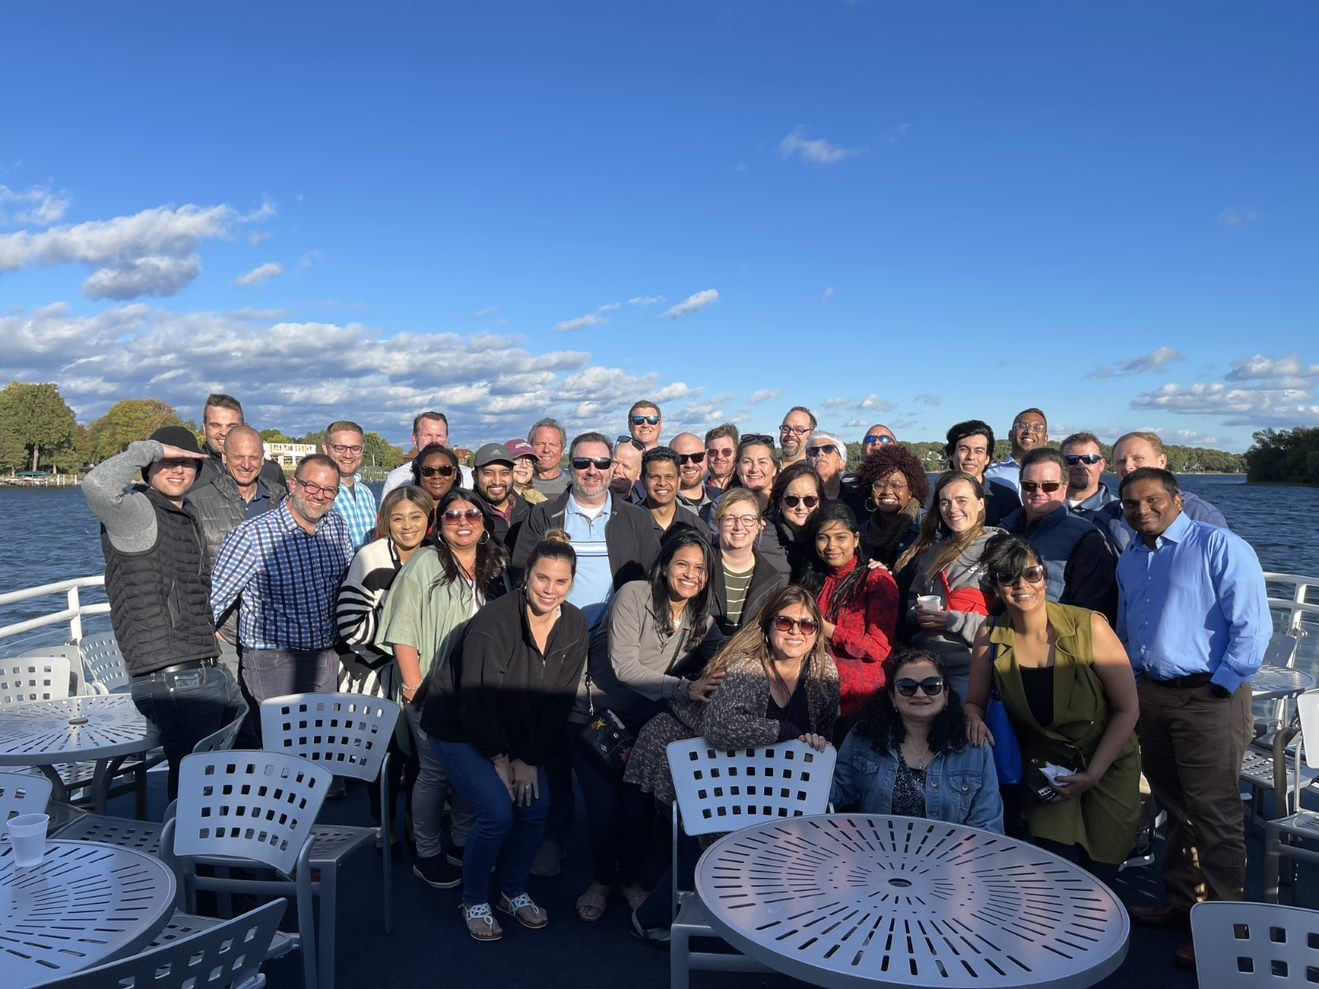 Calix all team on deck! Enjoying a nice boat ride together after a productive team offsite.